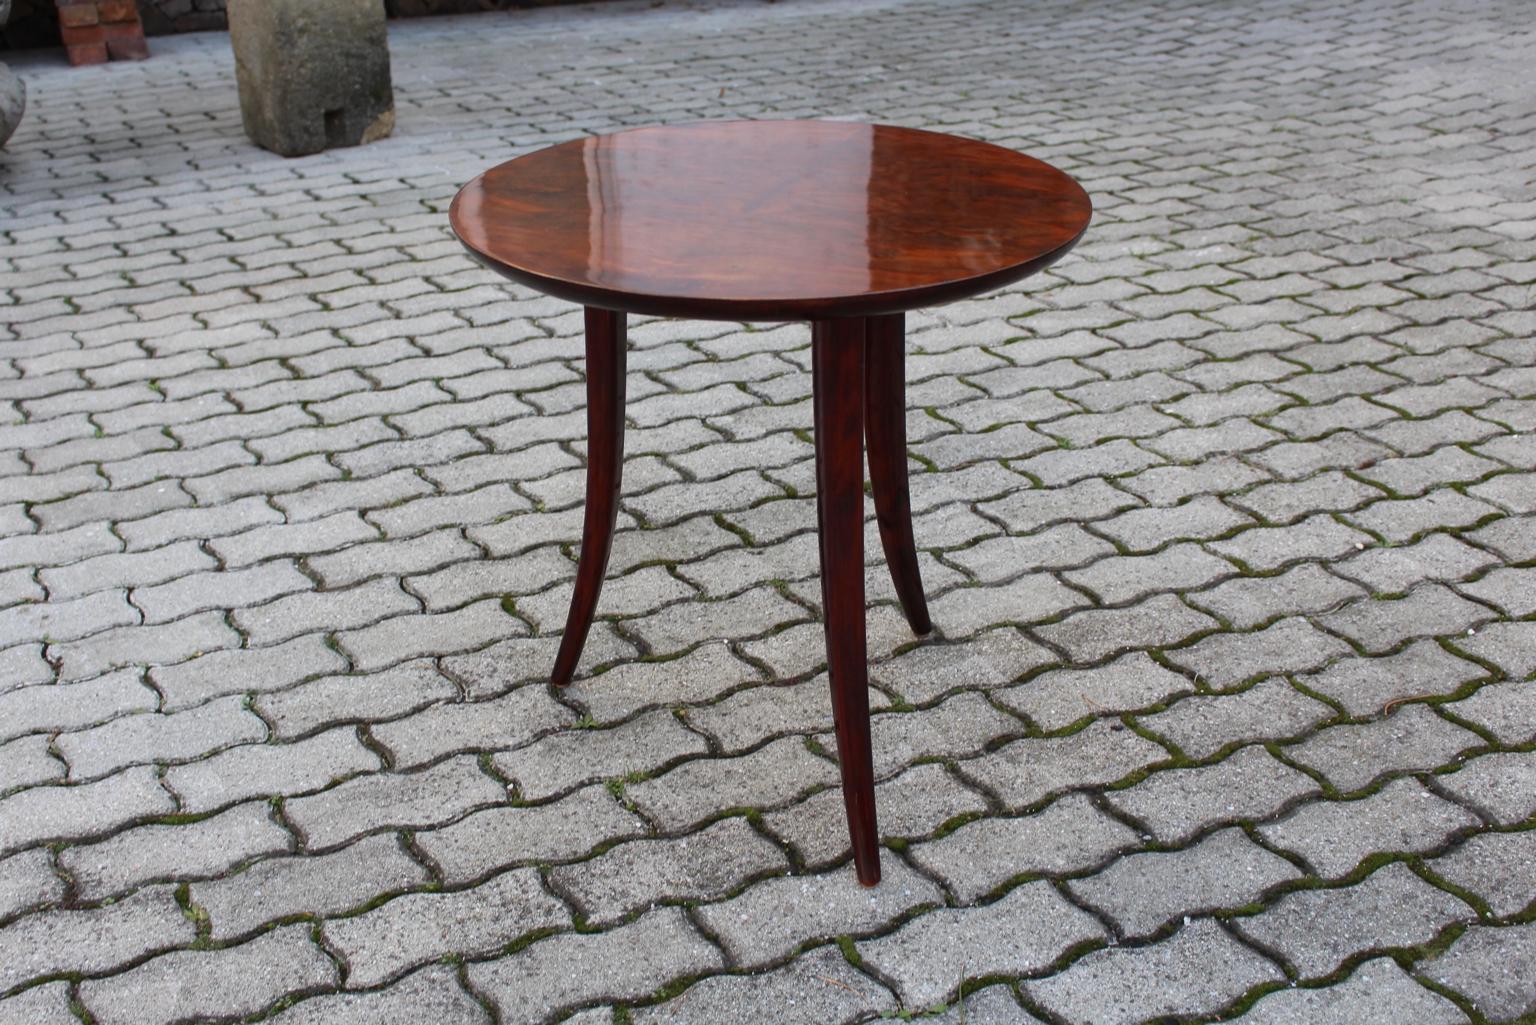 Art Deco circular charming three-legged side table from walnut by Josef Frank for Haus & Garten, Vienna, circa 1926.
The side table was made of solid walnut feet and walnut veneer.
The circular table top was veneered with a beautiful walnut root